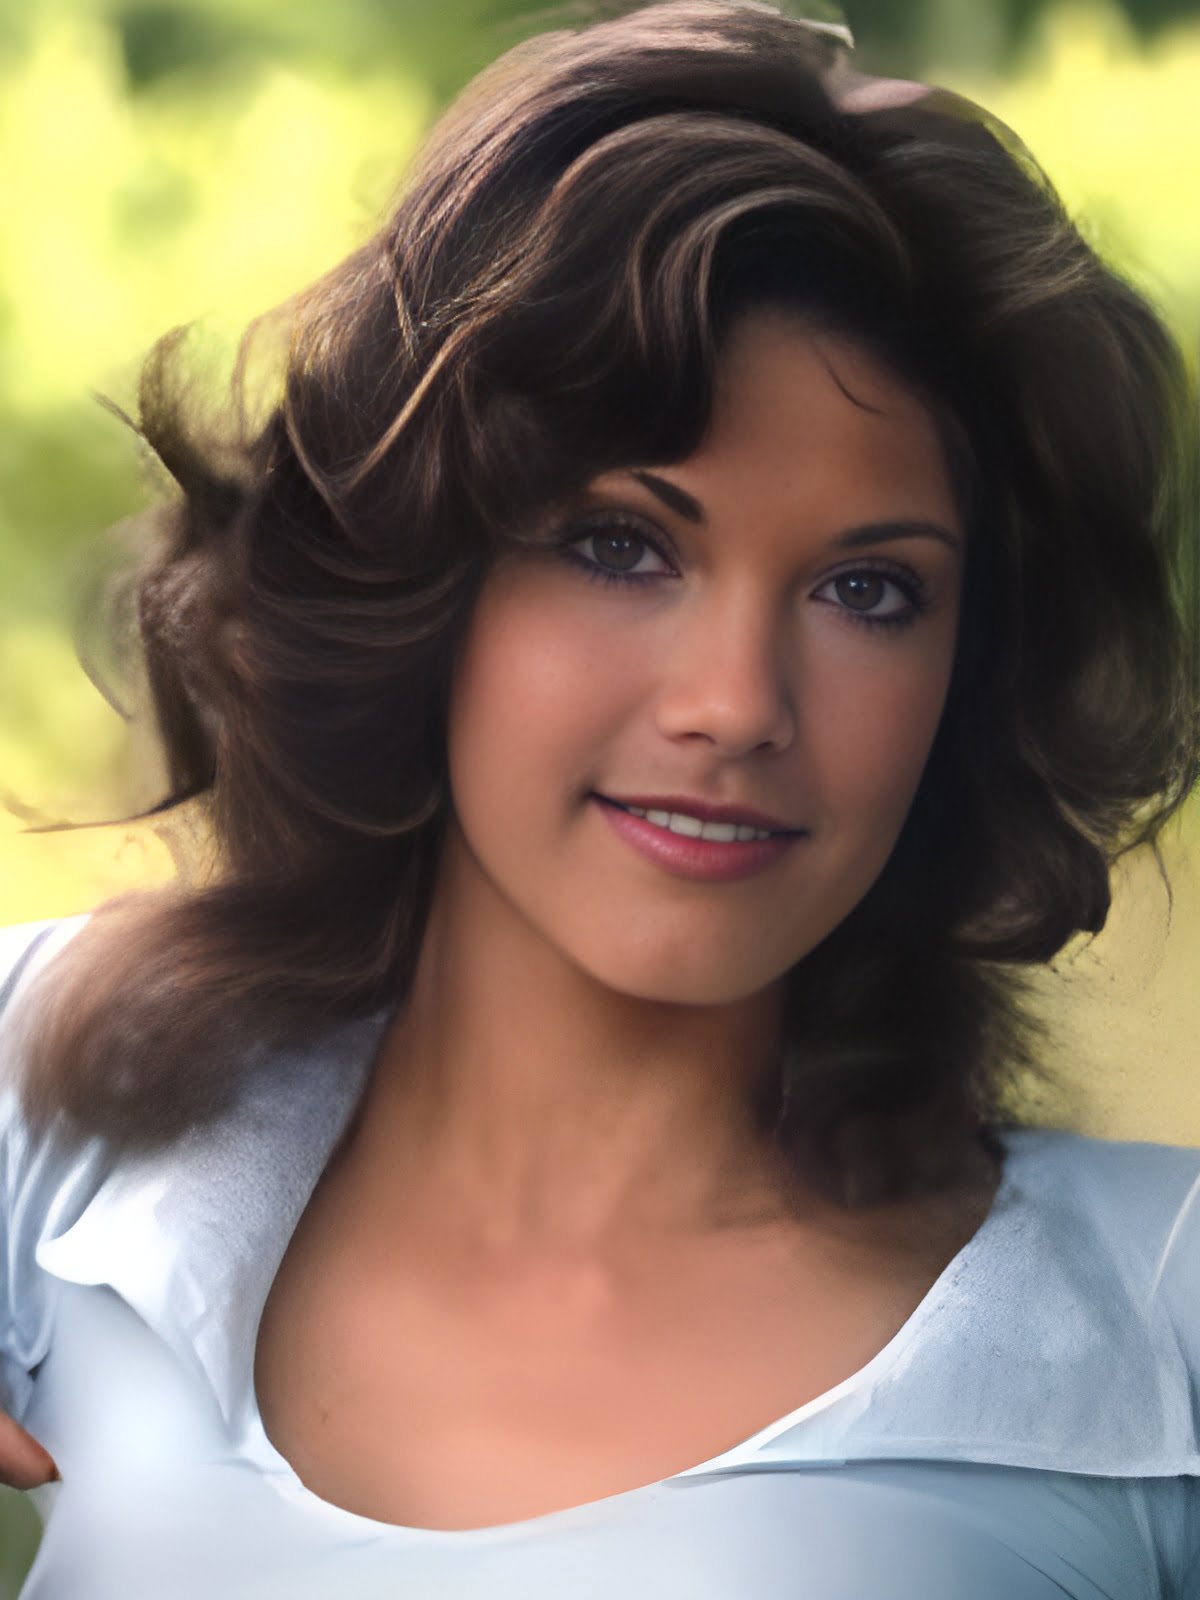 Barbi Benton Model Age Height Weight Wiki Biography Photos And More